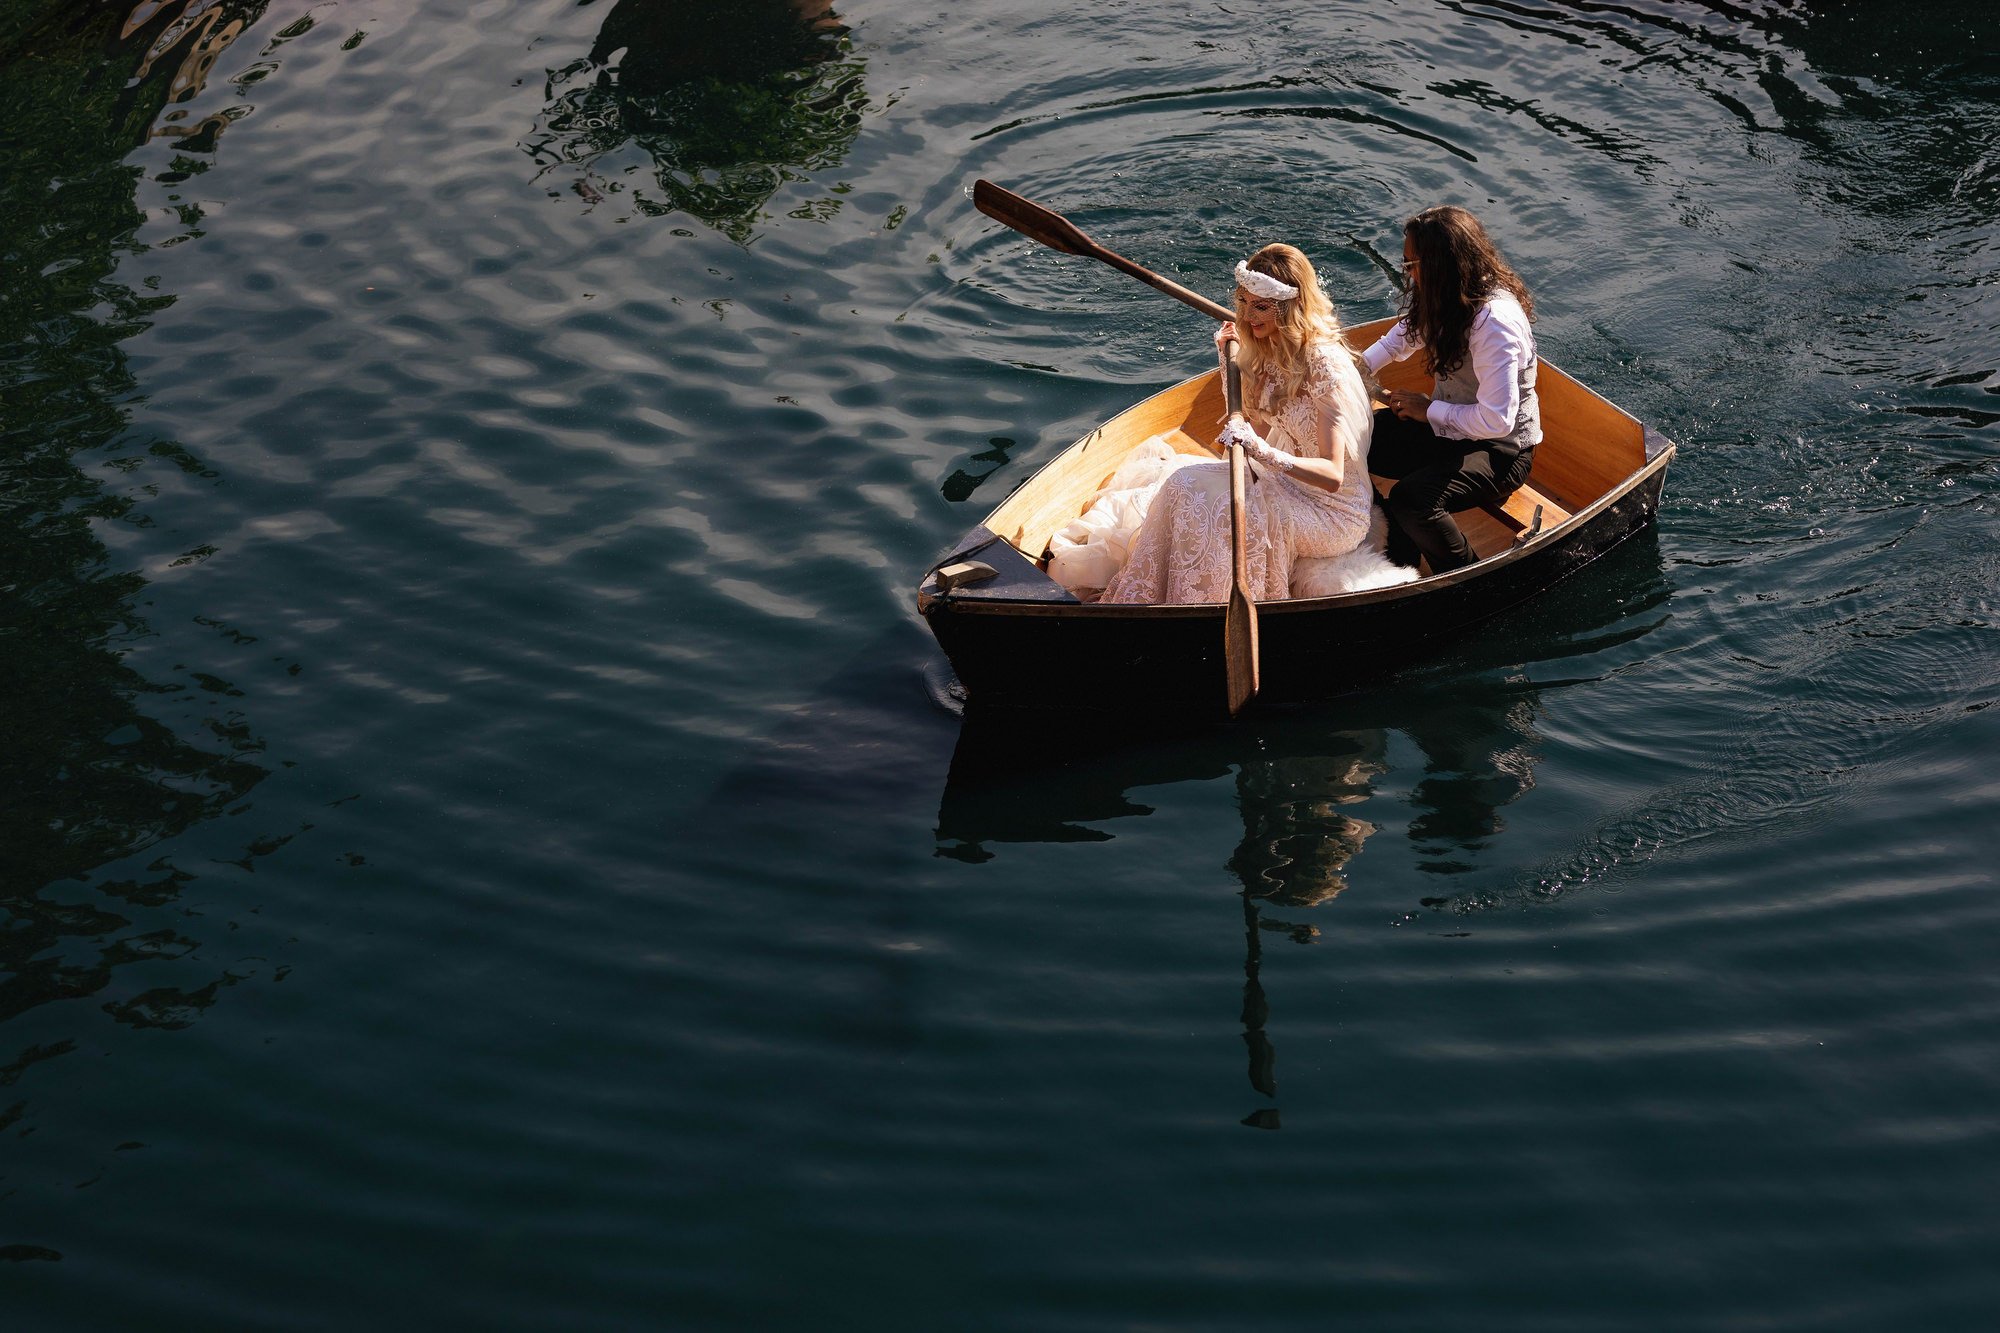 Euridge Manor, Cotswolds, Multicultural Wedding, lake, row boat